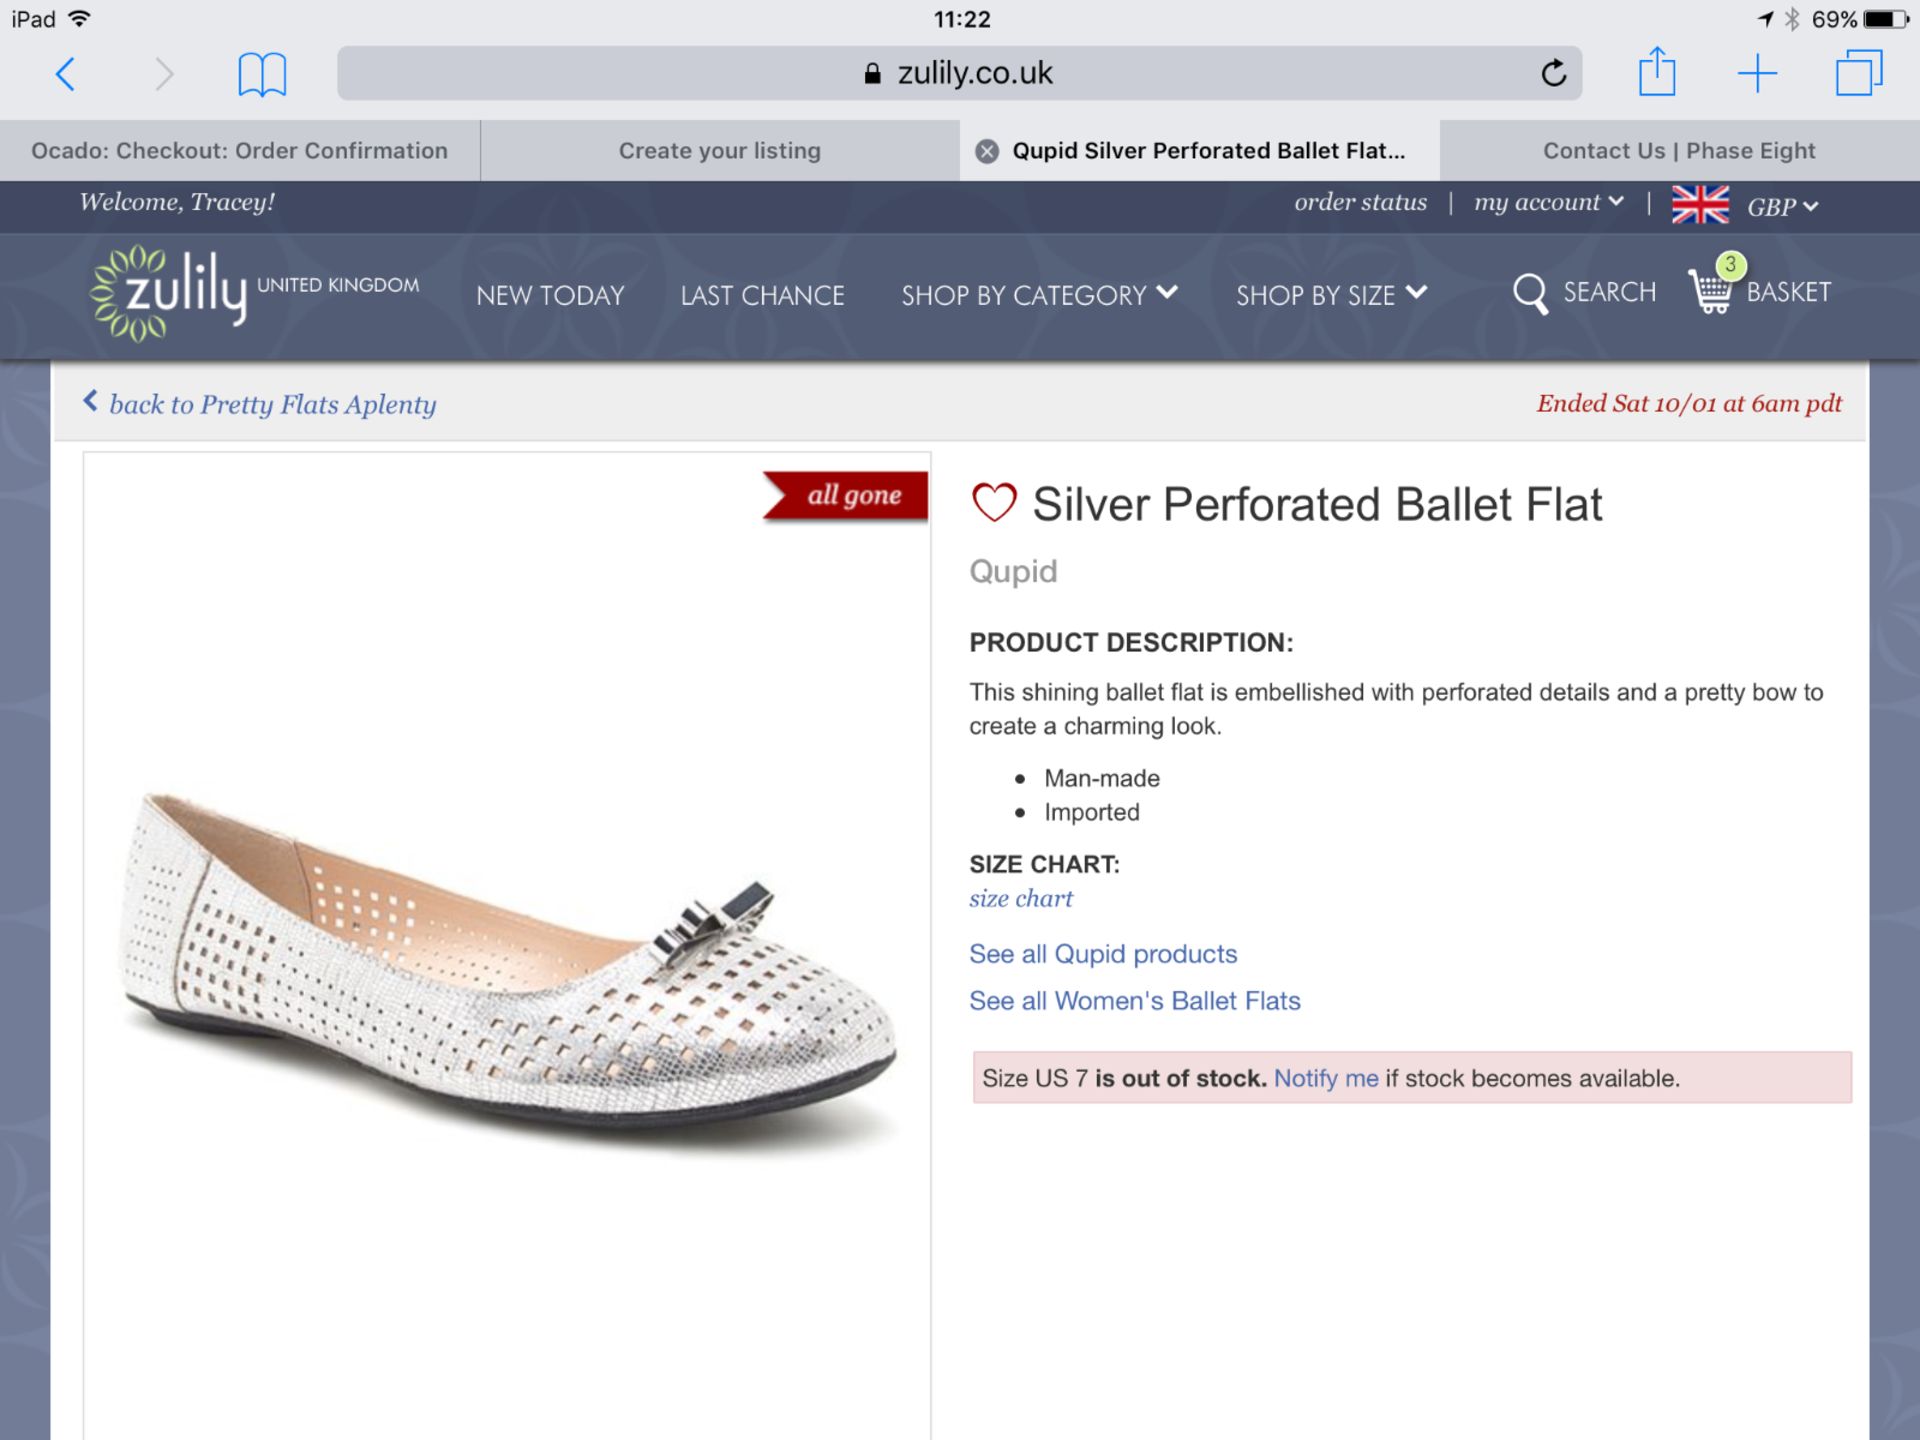 Qupid Silver Perforated Ballet Flat, Size US 7 Eur 37 UK 4.5 (New with box) [Ref: 42105582- C-001] - Image 2 of 3